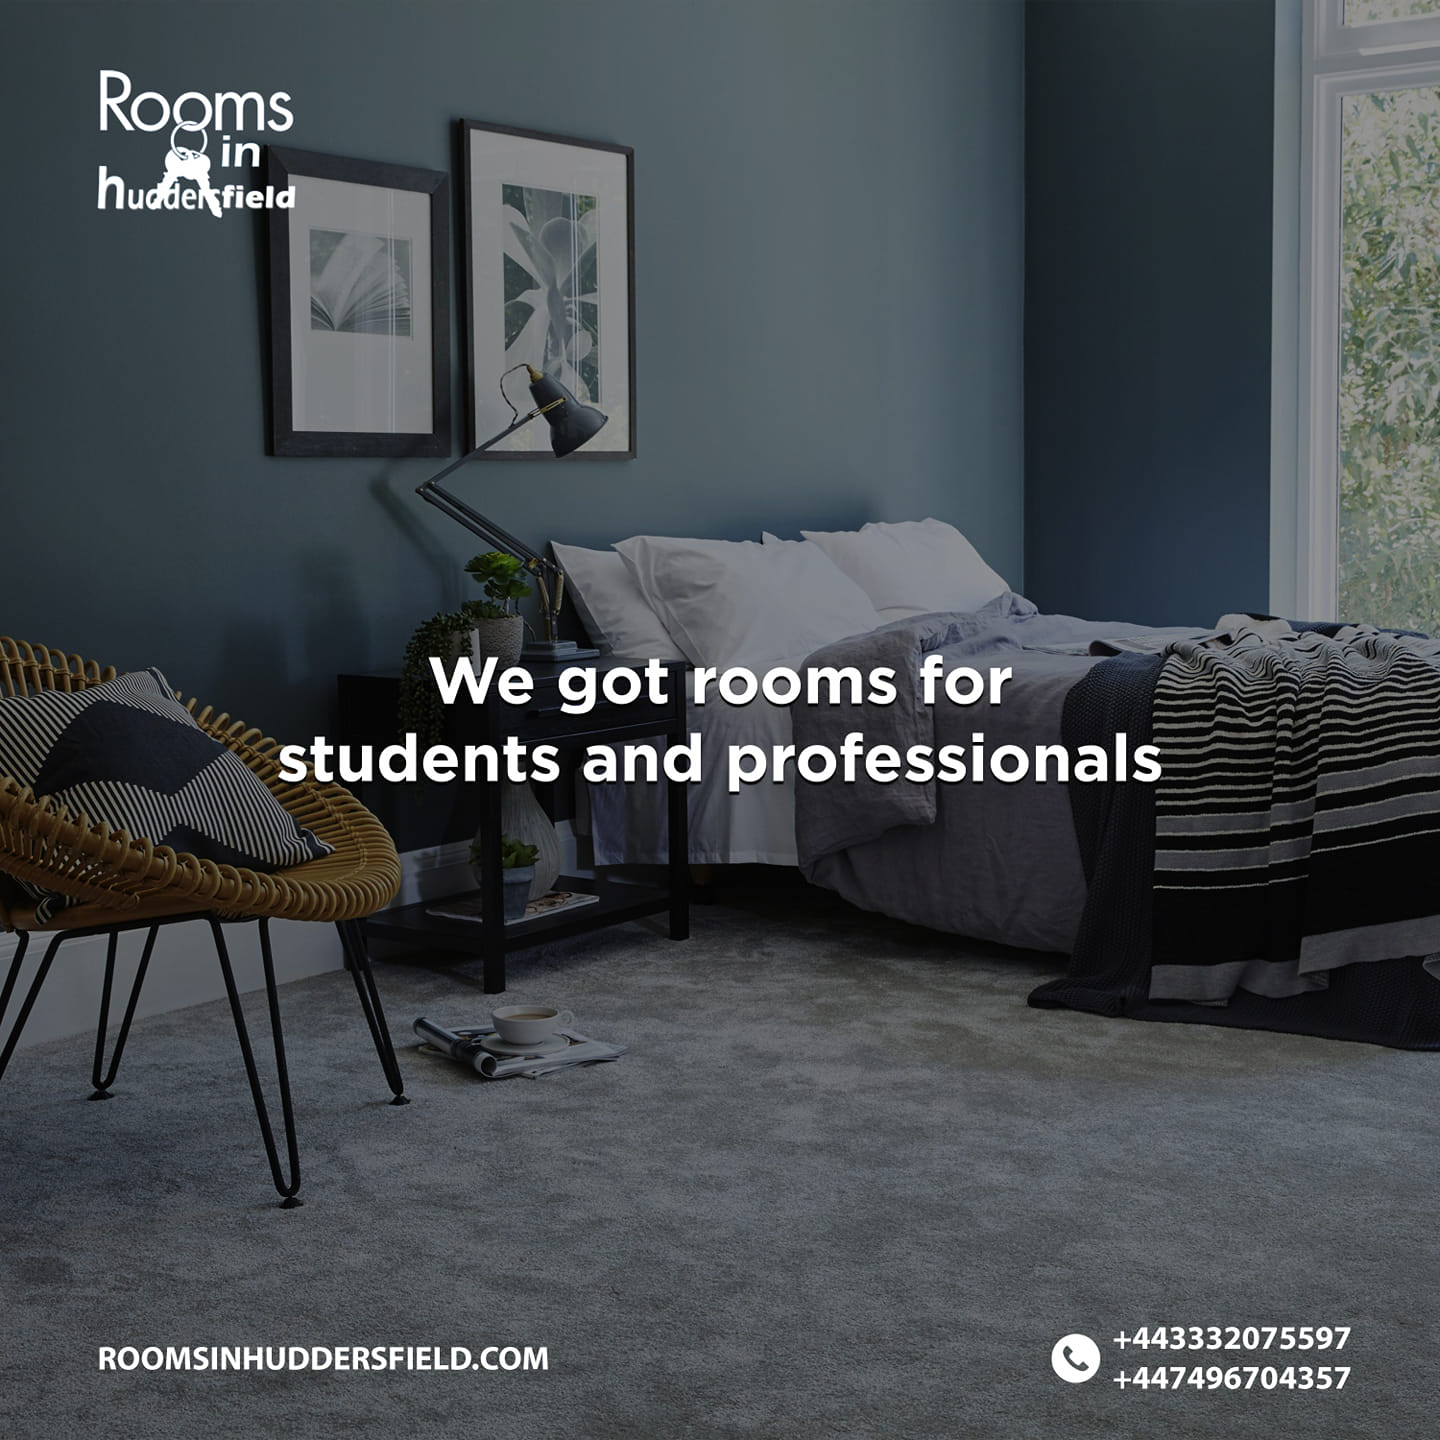 Get Student accommodation in Huddersfield